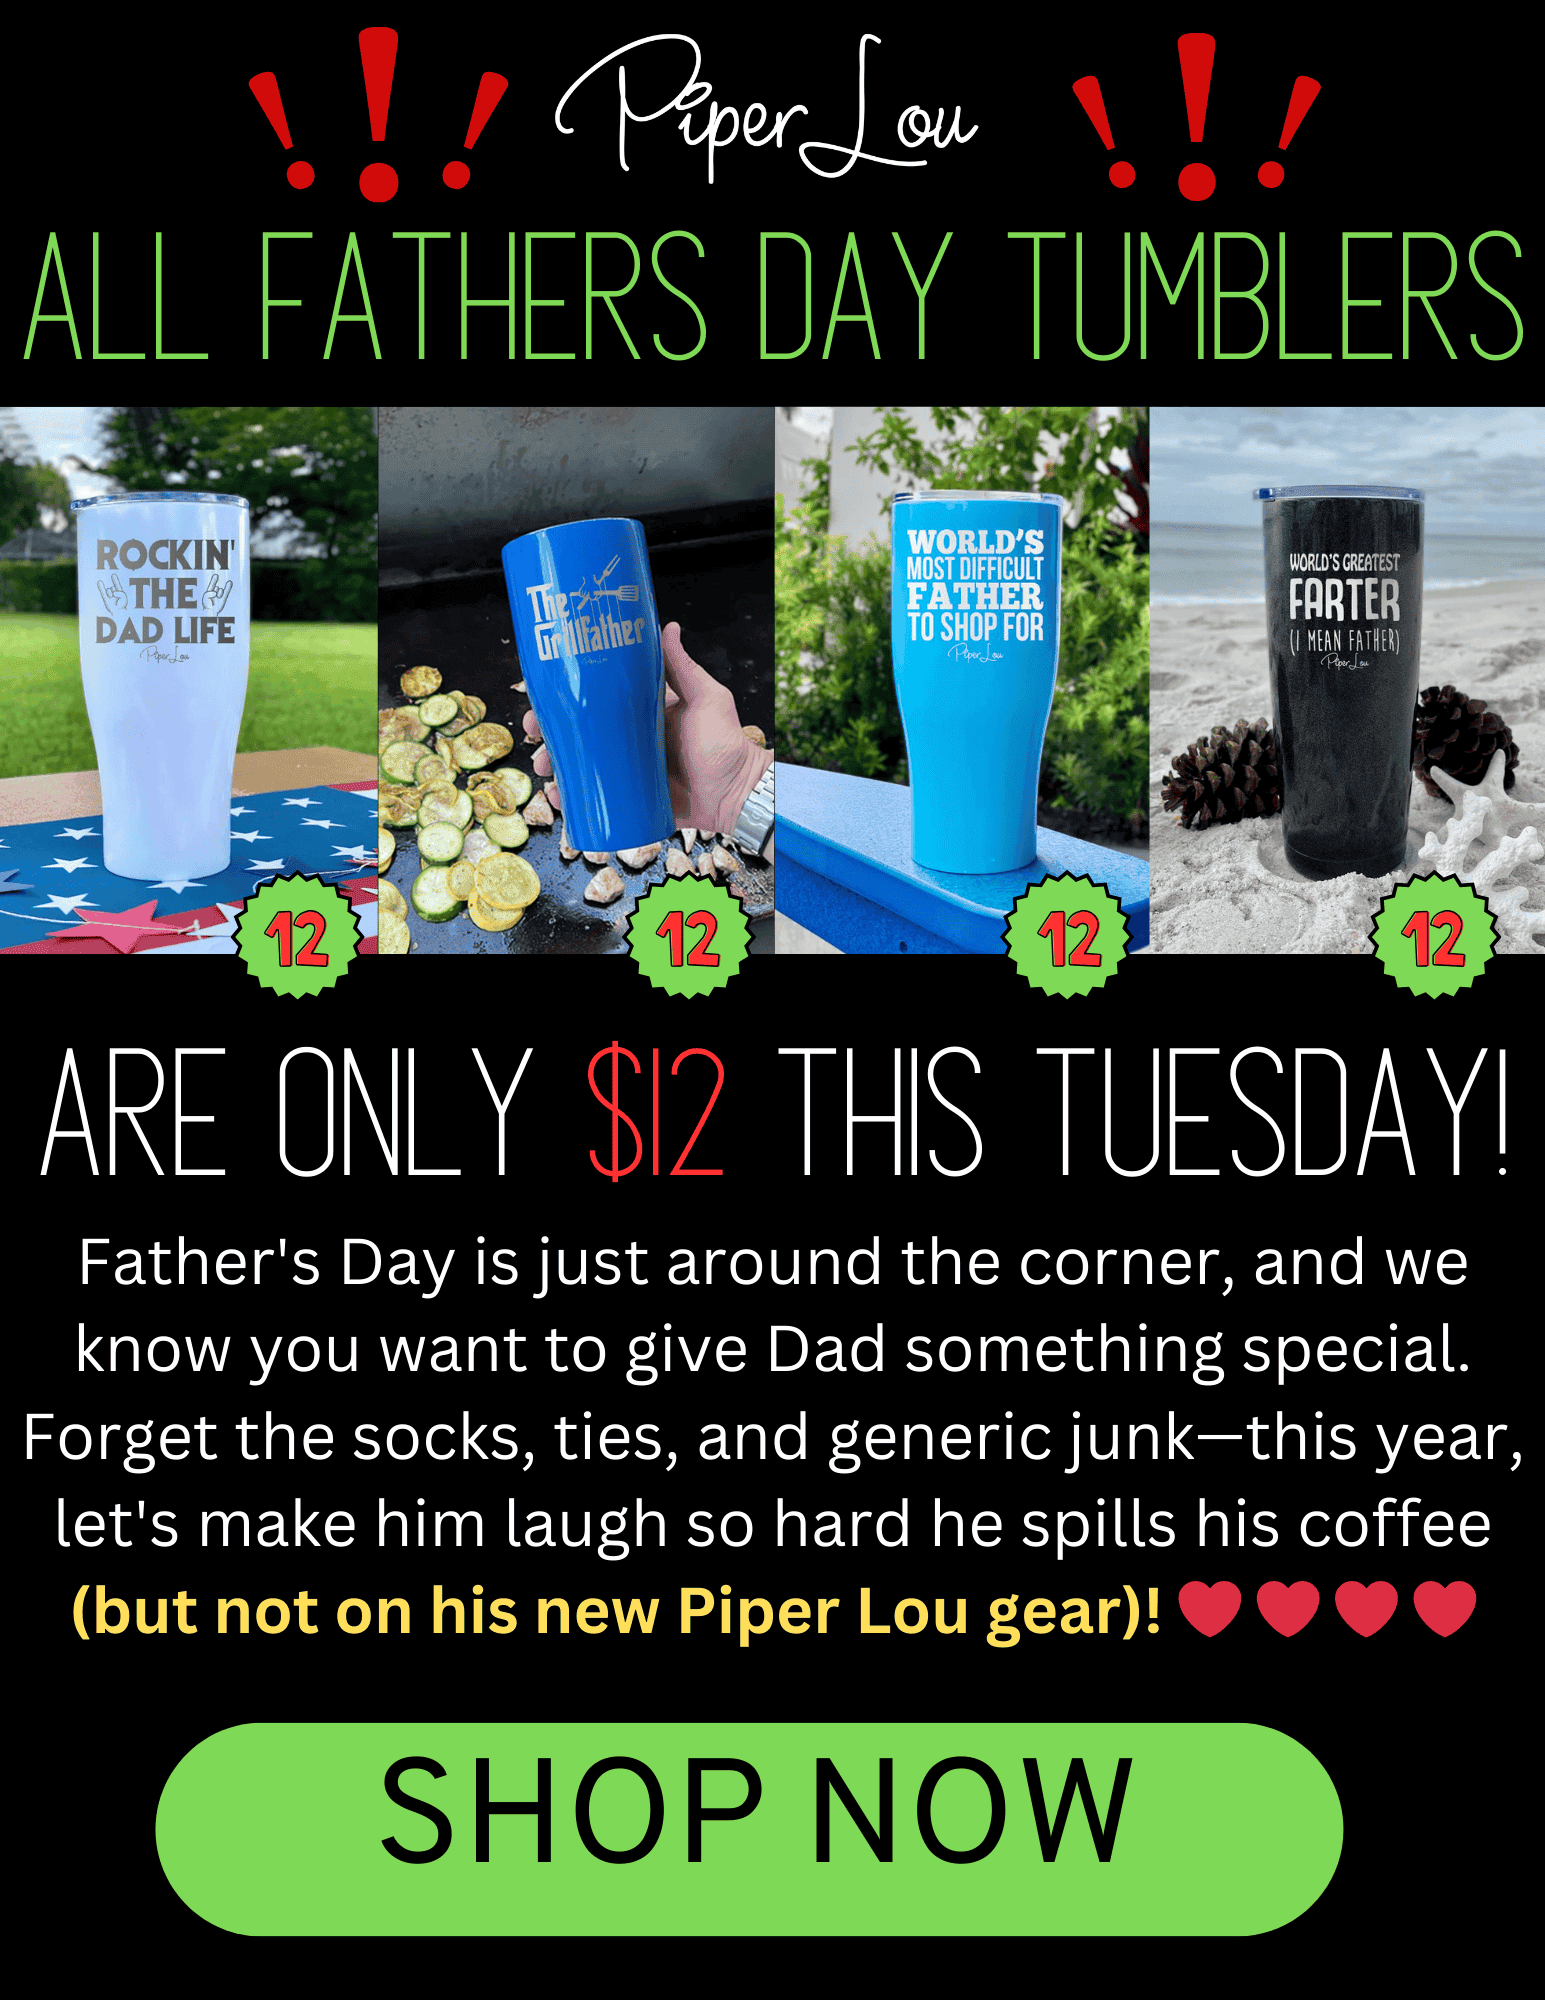 All Father's Day tumblers priced at \\$12 on Tuesday.